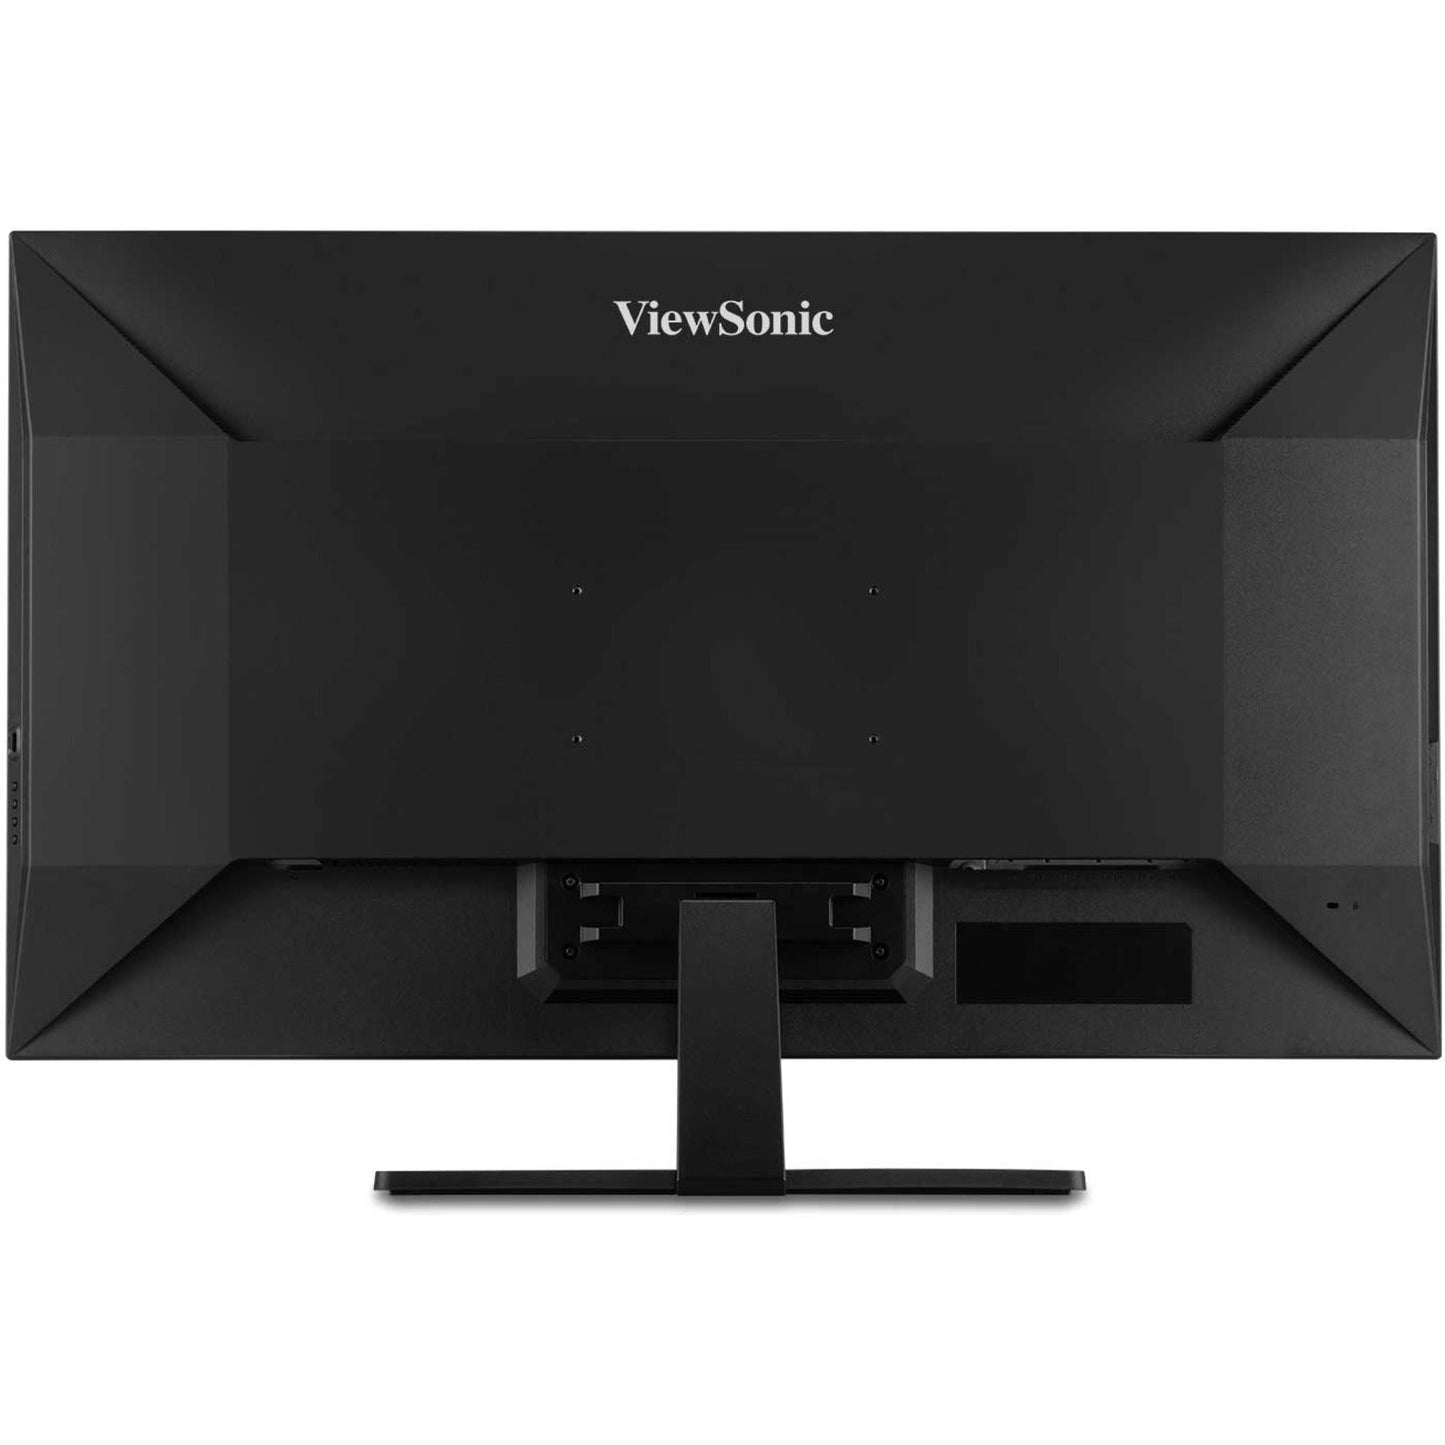 ViewSonic VX4381-4K 43 Inch Ultra HD MVA 4K Monitor Widescreen with HDR10 Support Eye Care HDMI USB DisplayPort for Home and Office